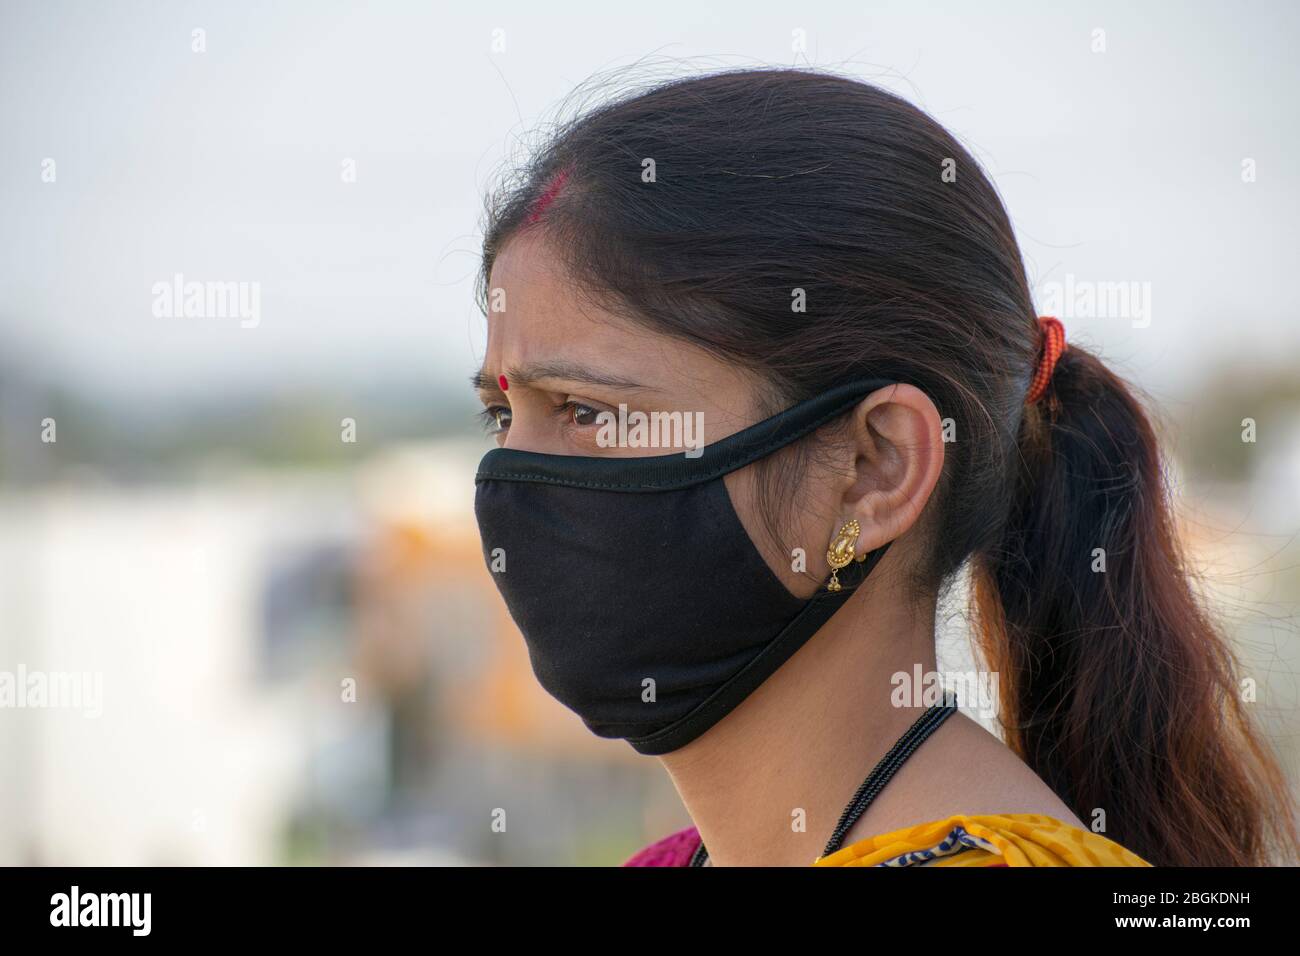 Detail of Indian woman wearing a Black face mask.Side view face, blurred background. Corona virus, COVID-19 quarantine. Mask as protection. Stock Photo